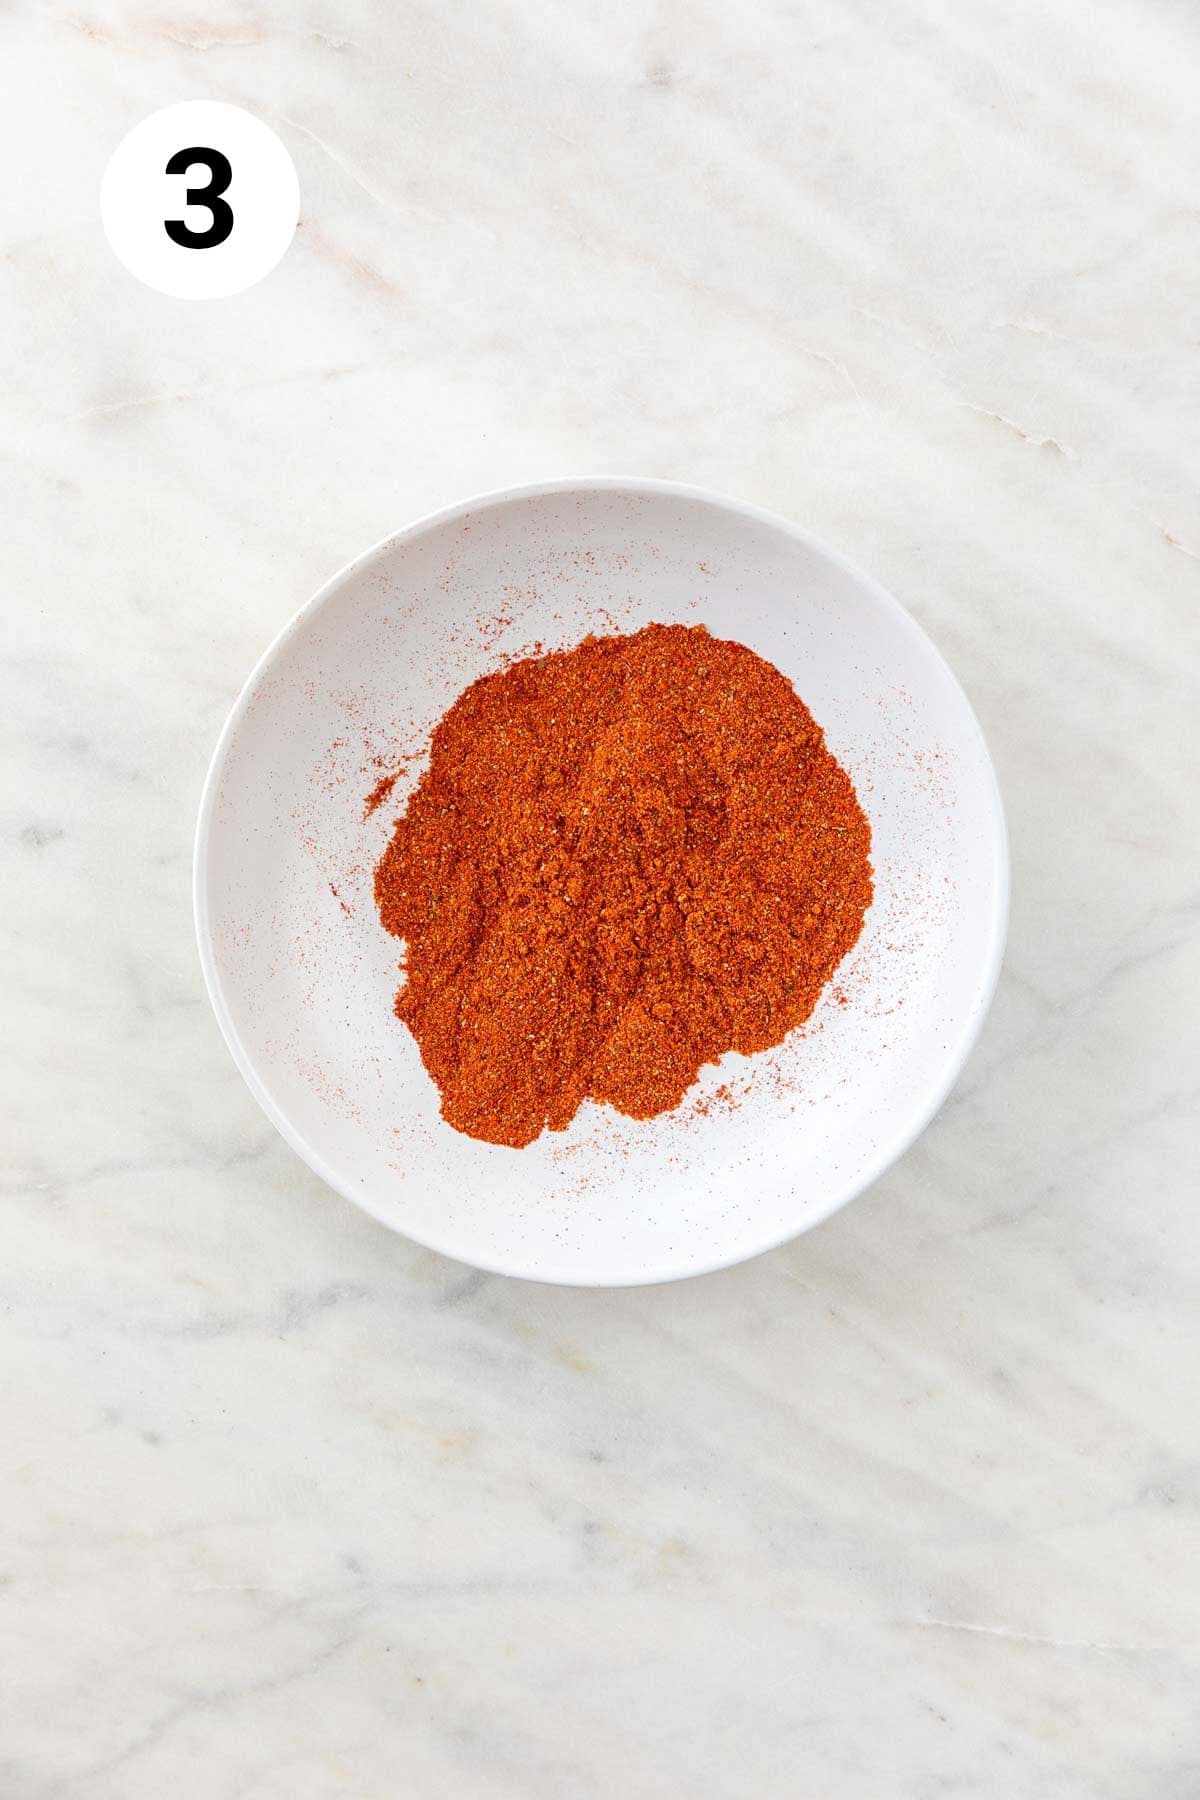 Homemade chili powder in a shallow dish after grinding in a spice grinder.